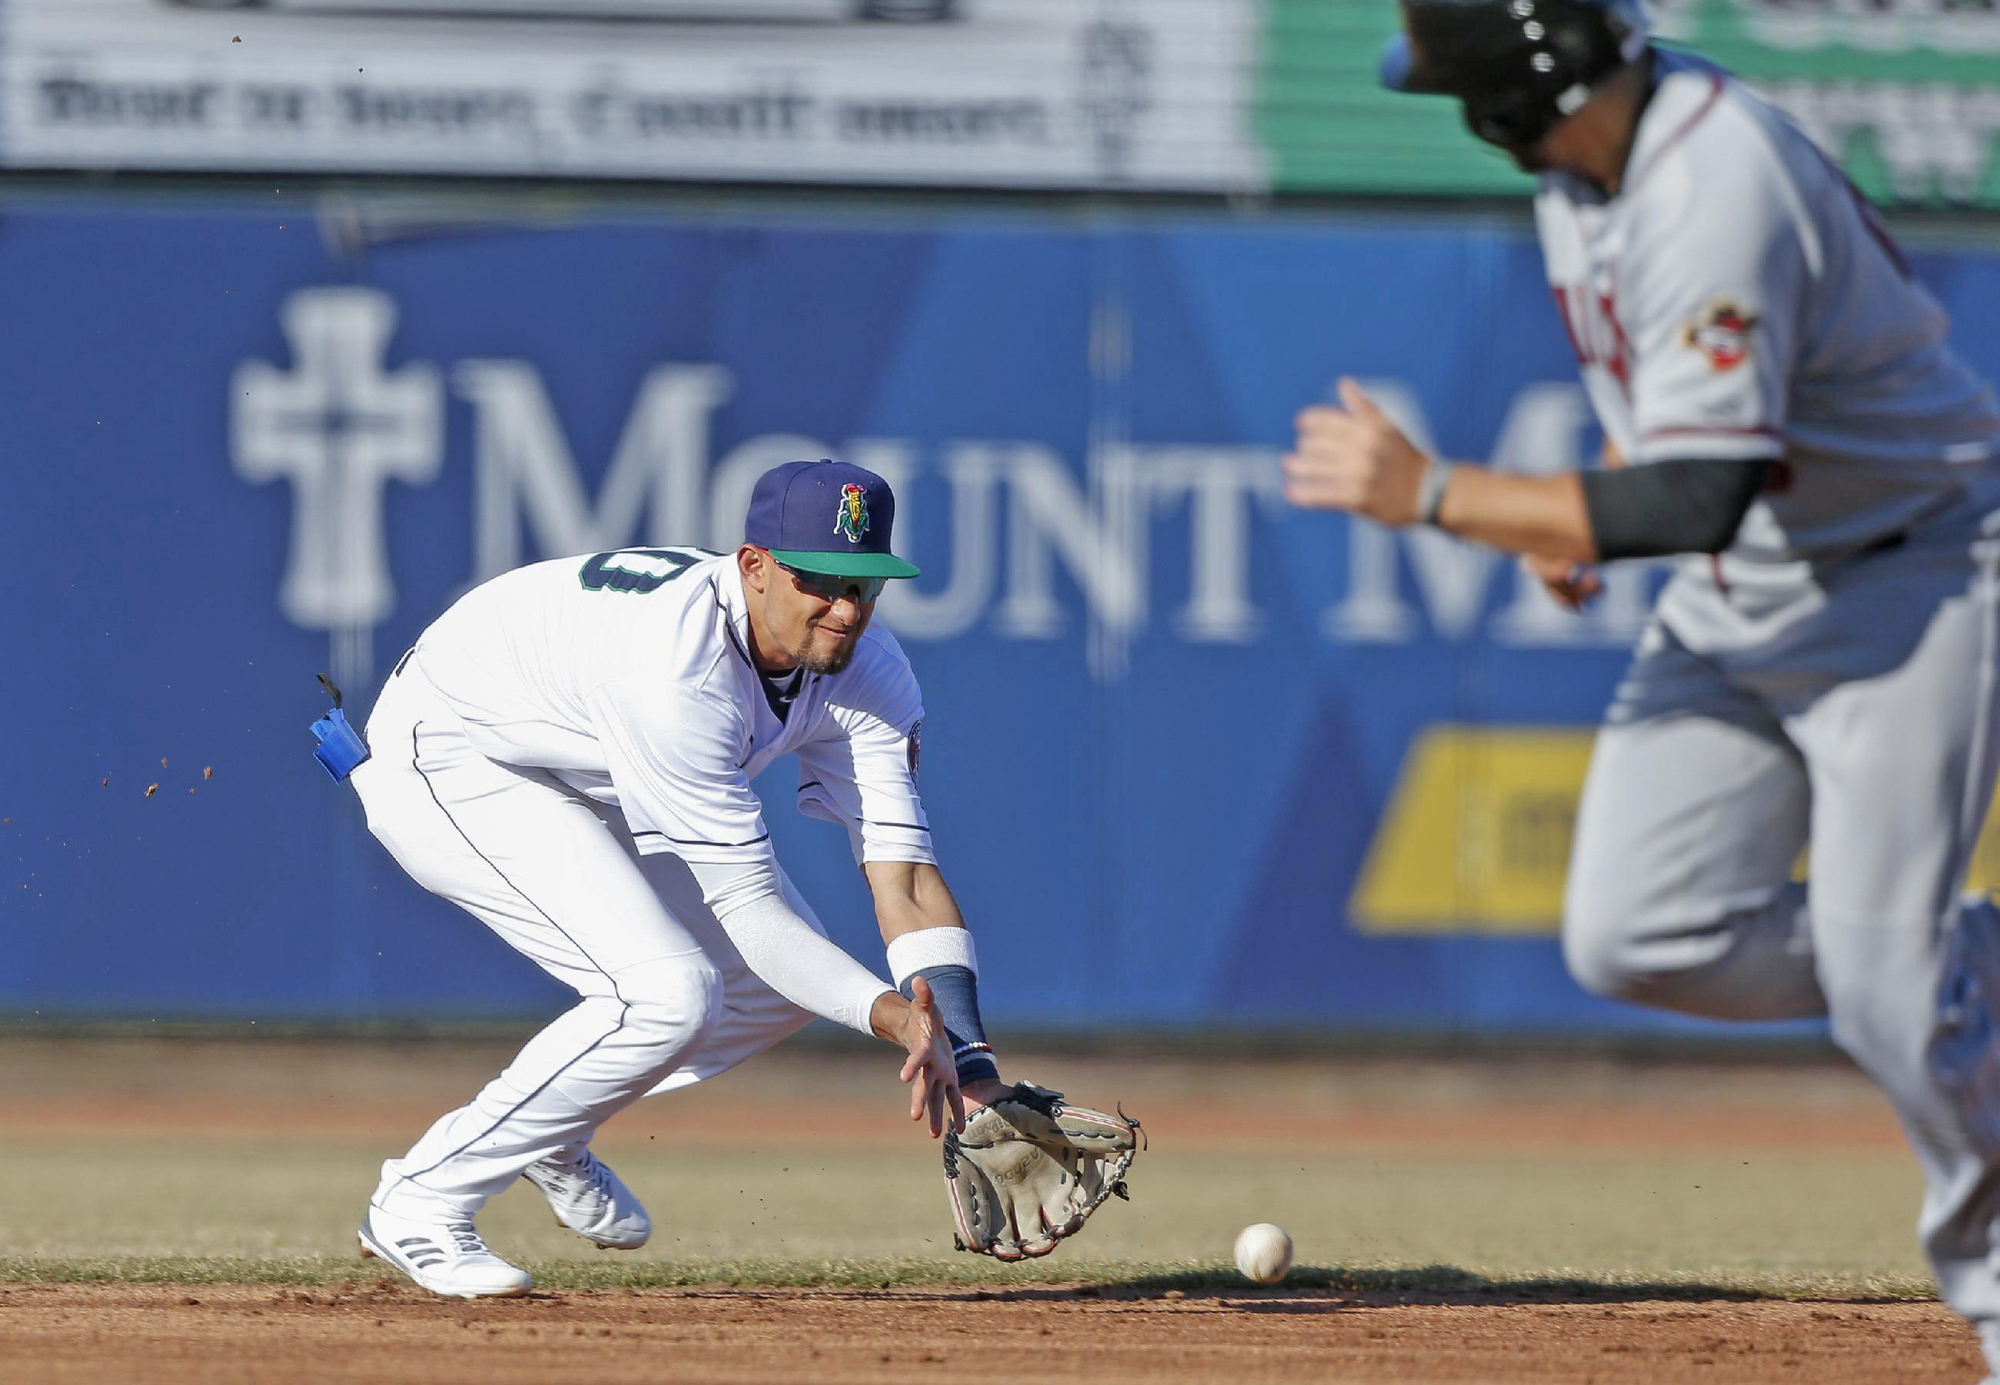 Royce Lewis made a play at shortstop during the Kernels’ home opener on April 7.